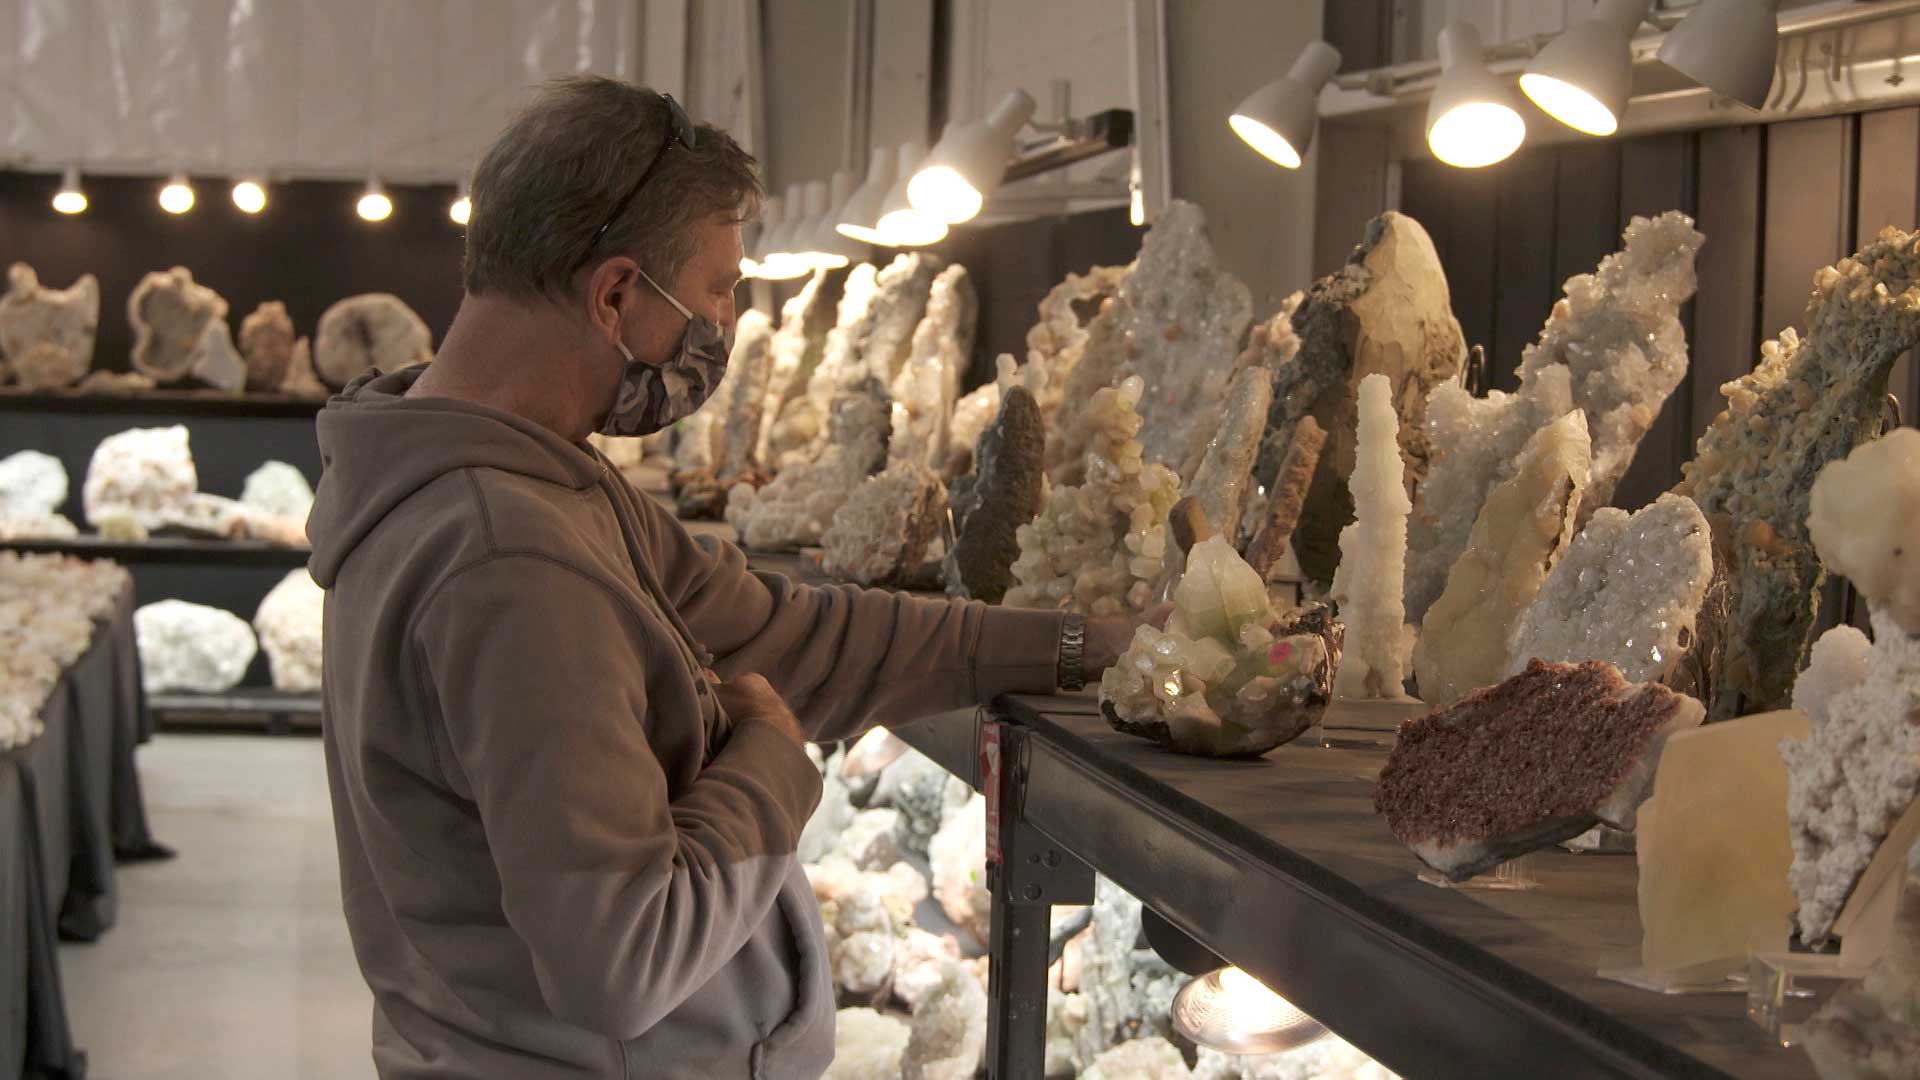 Mark Young examines a gem at Superb Minerals. The company is temporarily in Tucson for the Tucson Gem, Mineral and Fossil Showcase, despite the event featuring significantly fewer vendors due to the pandemic. March 2020. 